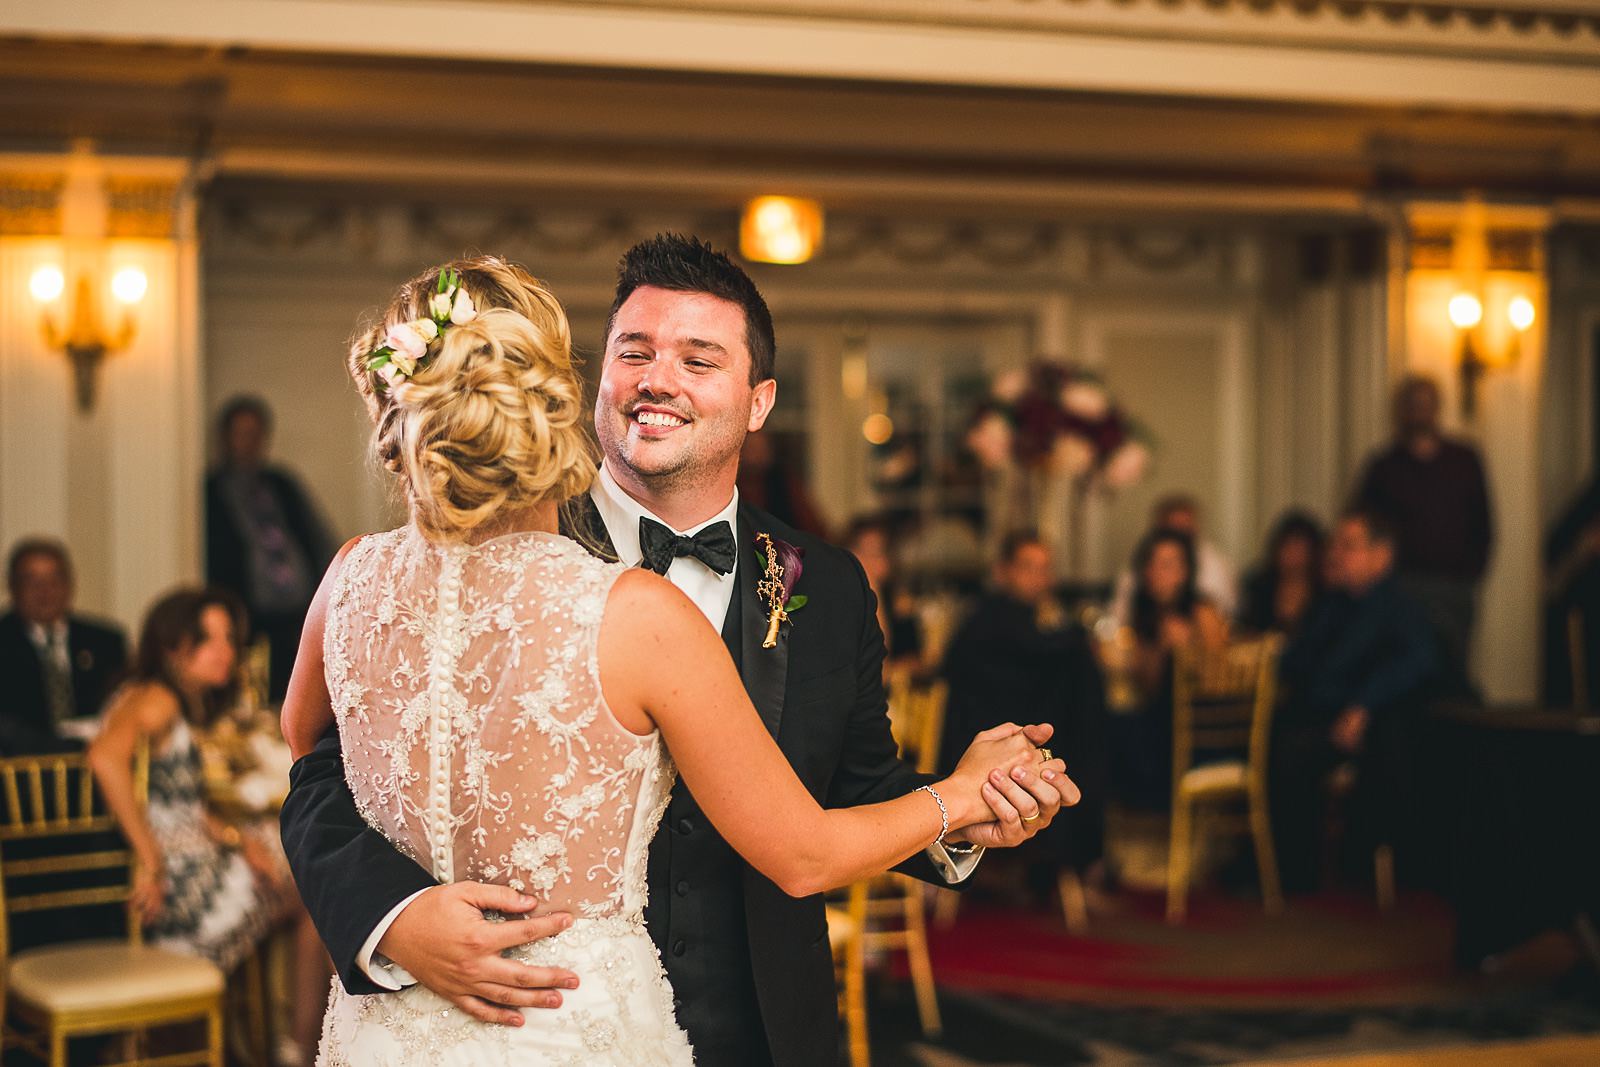 60 bride and groom first dance photography - Chicago Drake Hotel Wedding // Corie + Jordan